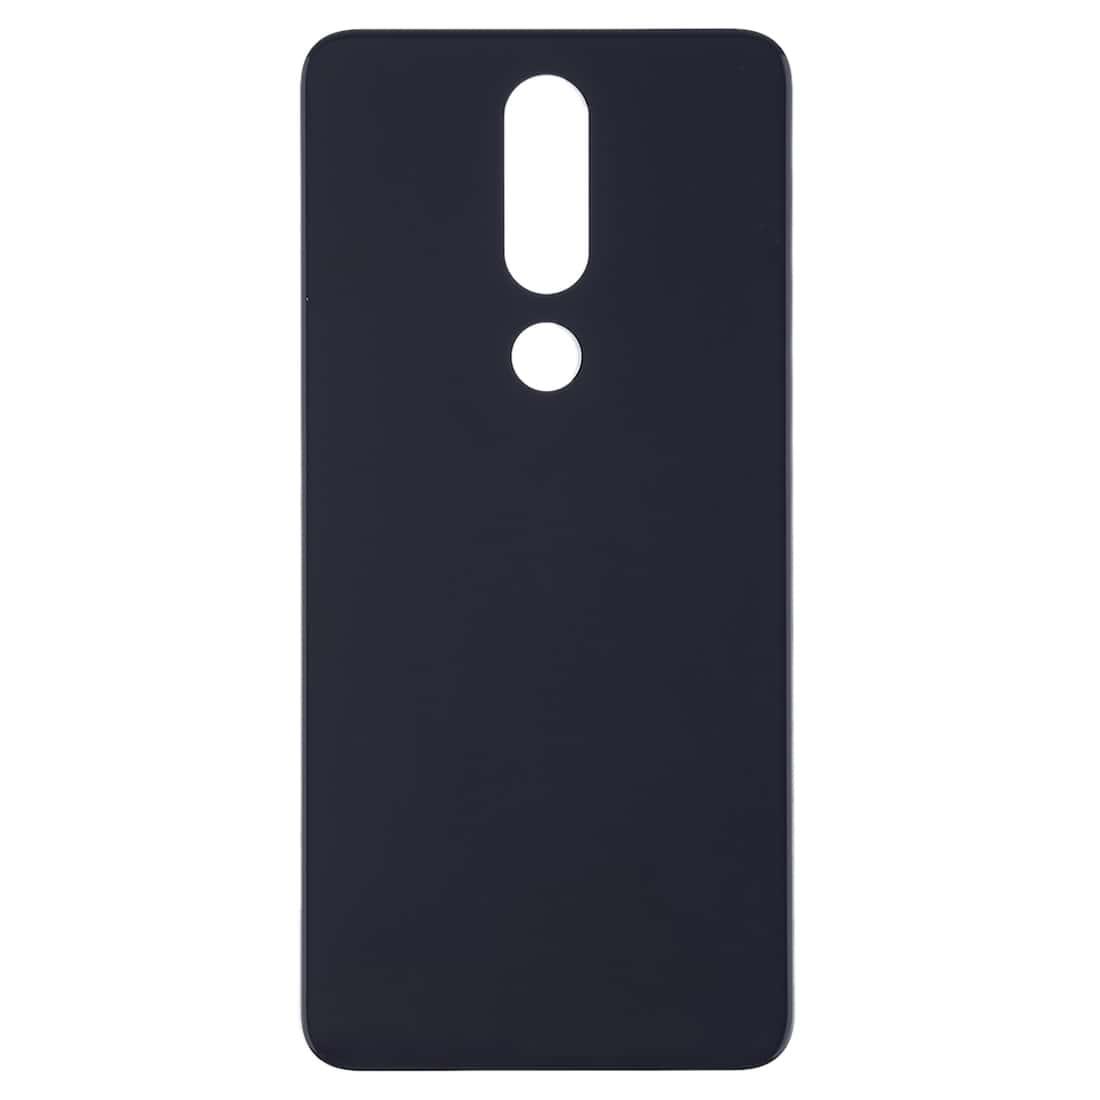 Back Glass Panel for  Nokia 6.1 Plus Blue